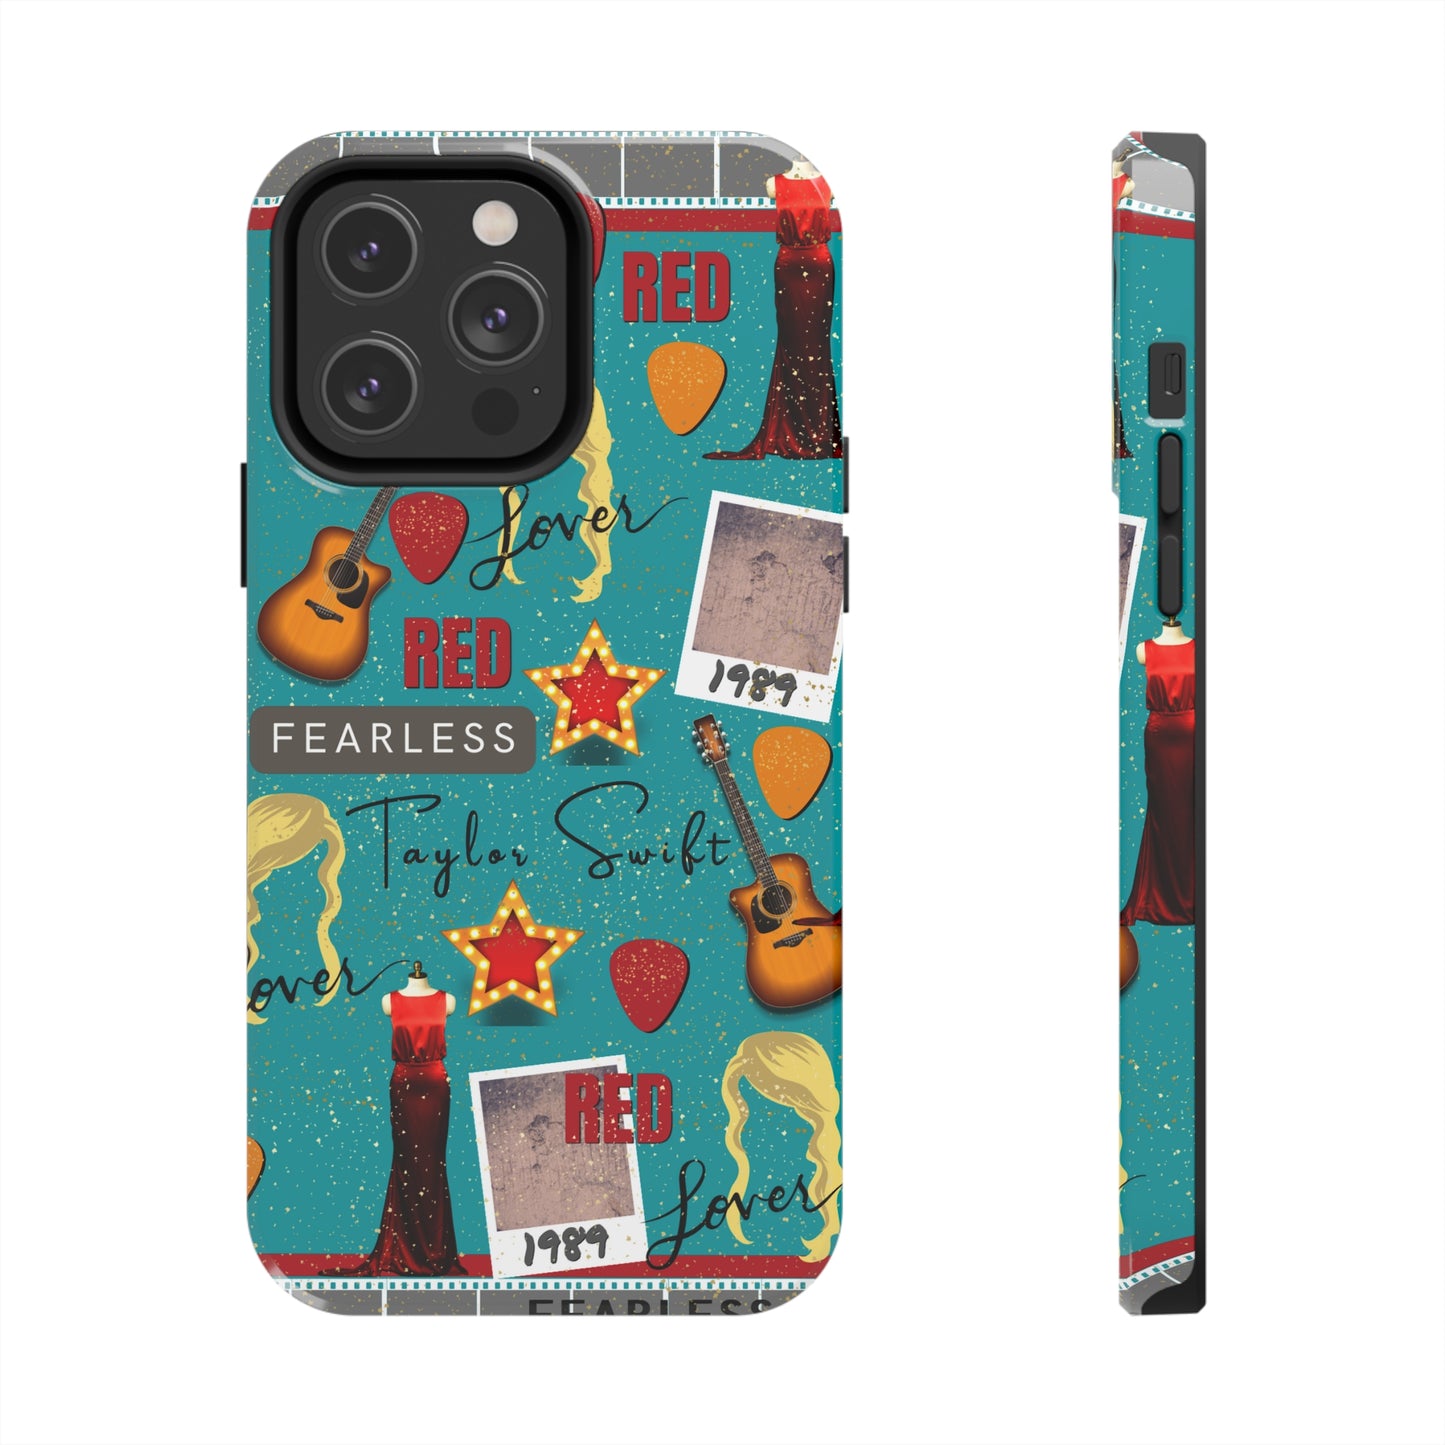 Swift iPhone Case, Fearless